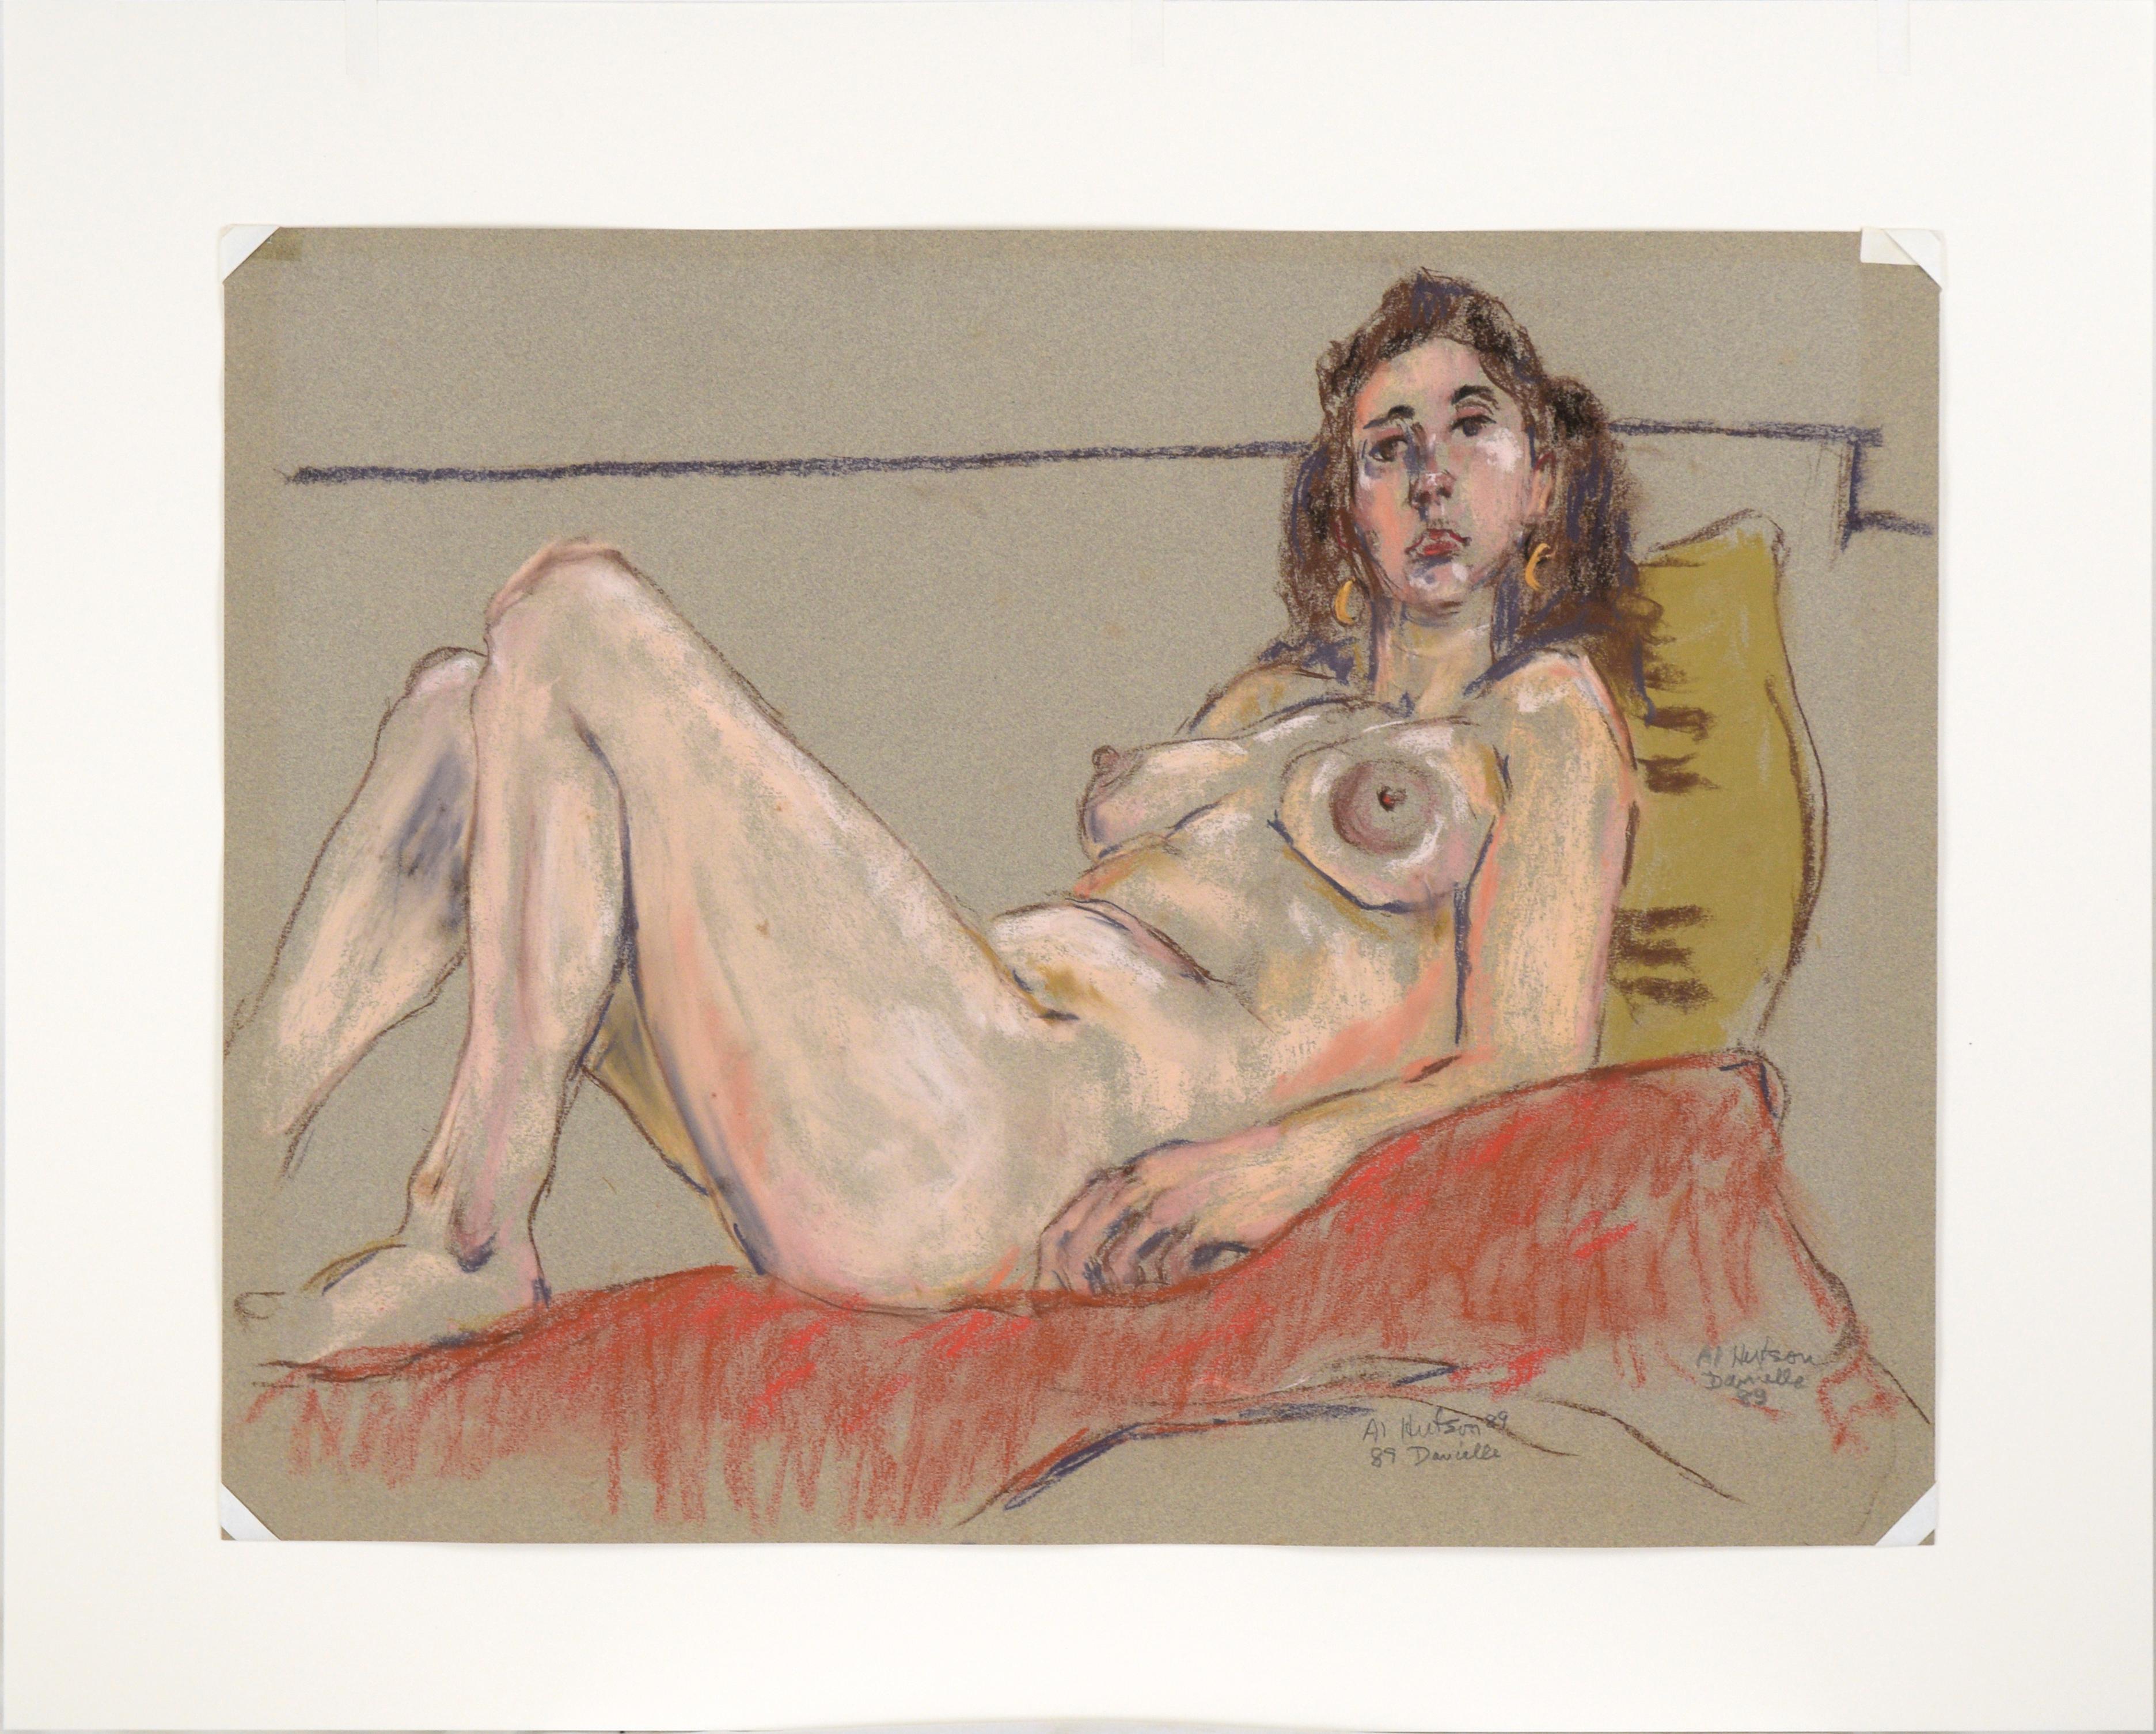 Bold nude pastel drawing by Albert Hutson (American, 1923-1994). A woman is reclined on a soft red surface, leaning up against a yellow pillow. The model is skillfully sketched, with quick but confident marks. Hutson has captured the character of